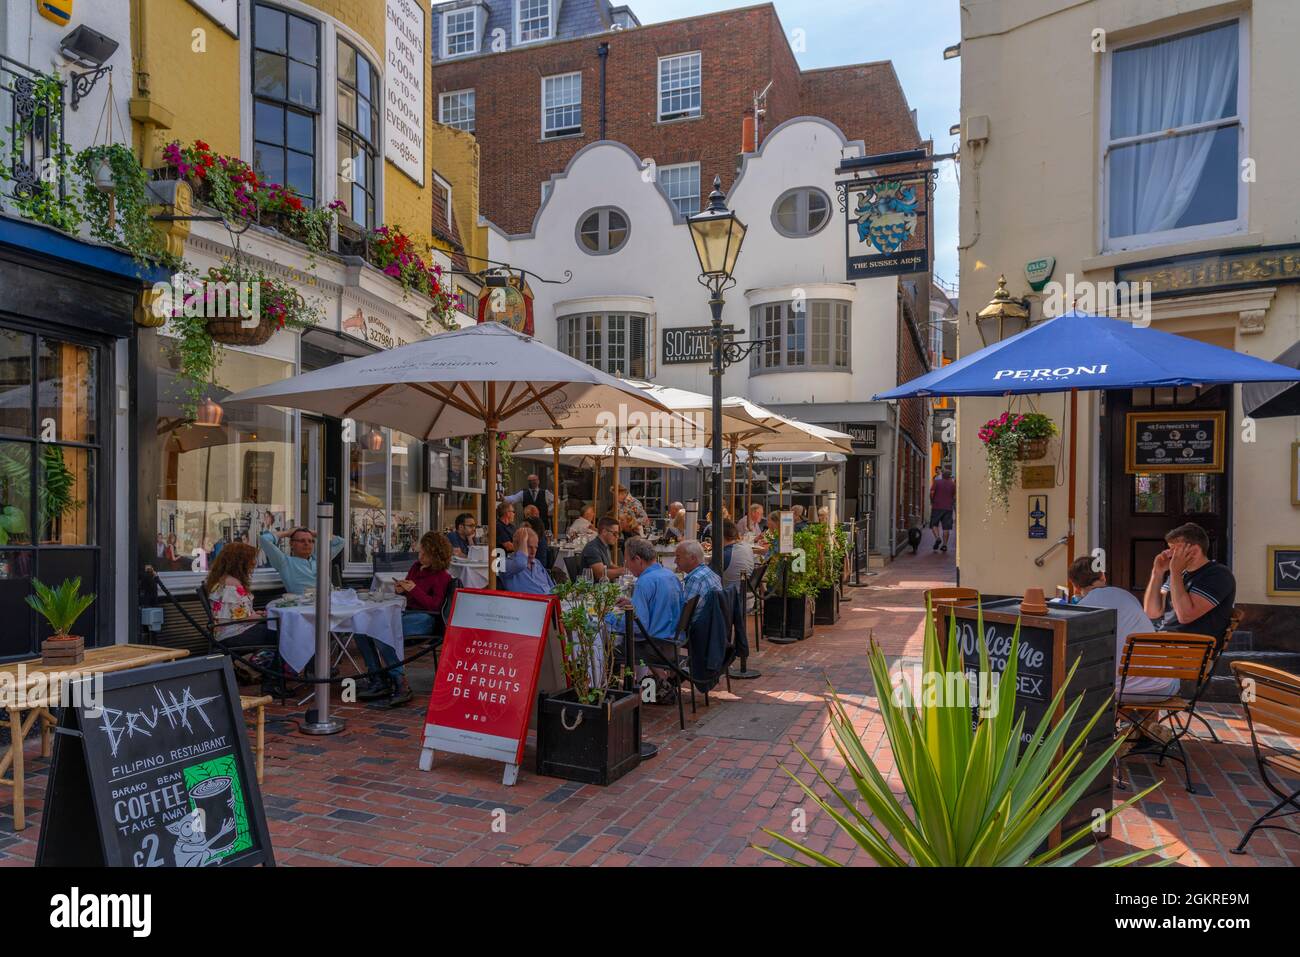 View of restaurants and cafes in The Lanes, Brighton, Sussex, England, United Kingdom, Europe Stock Photo